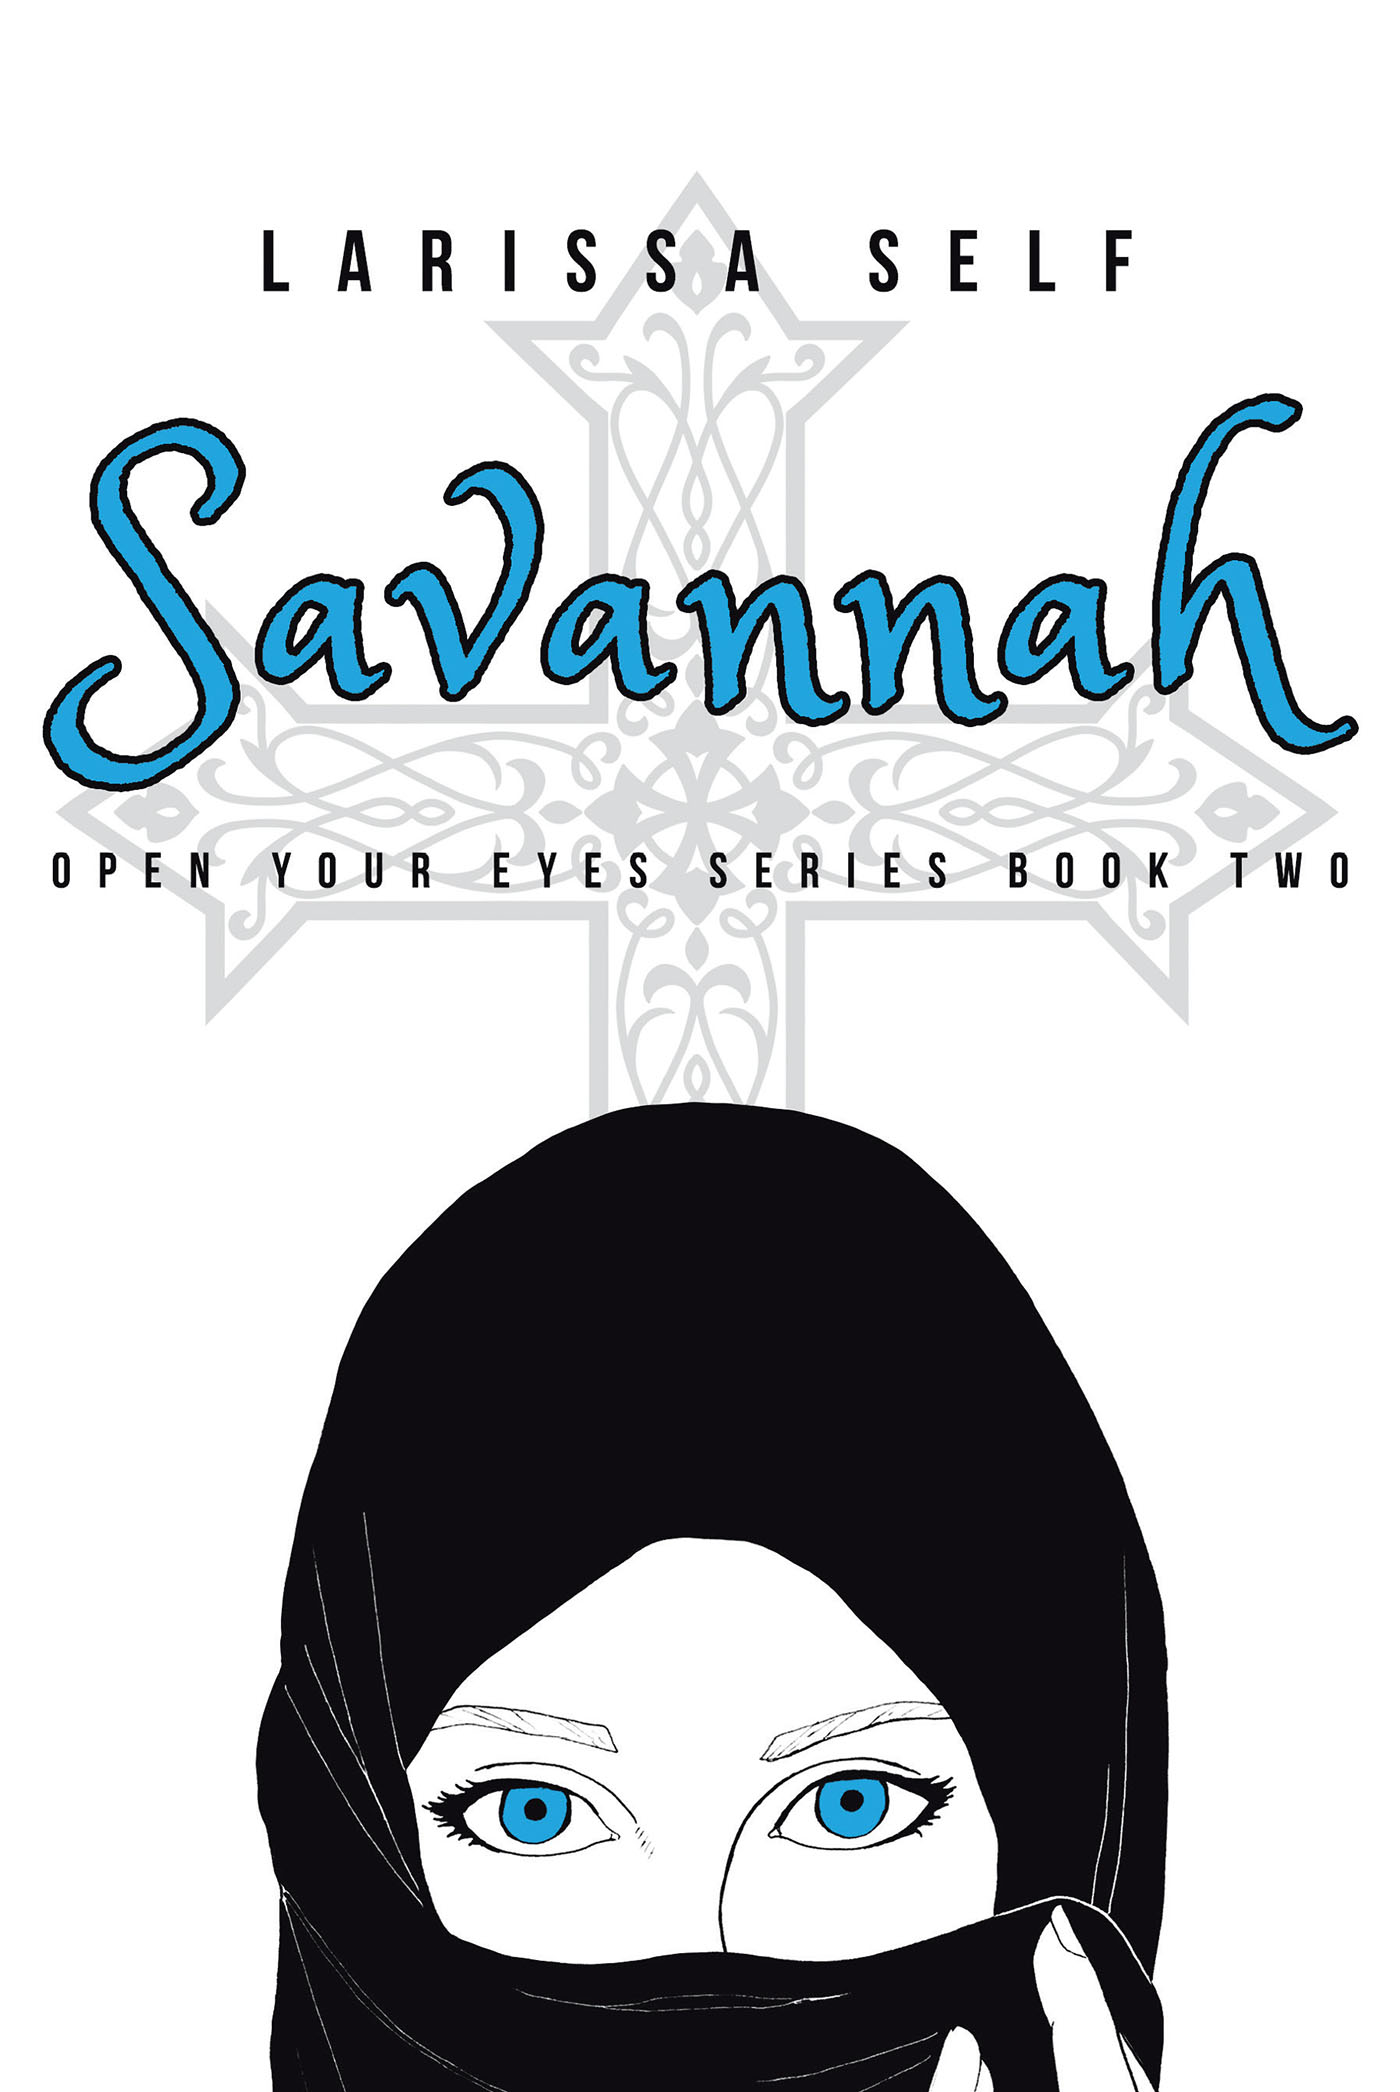 Larissa Self’s Newly Released "Savannah" is a Suspenseful Tale Based in the Dangerous and Traumatic Human Trafficking Trade